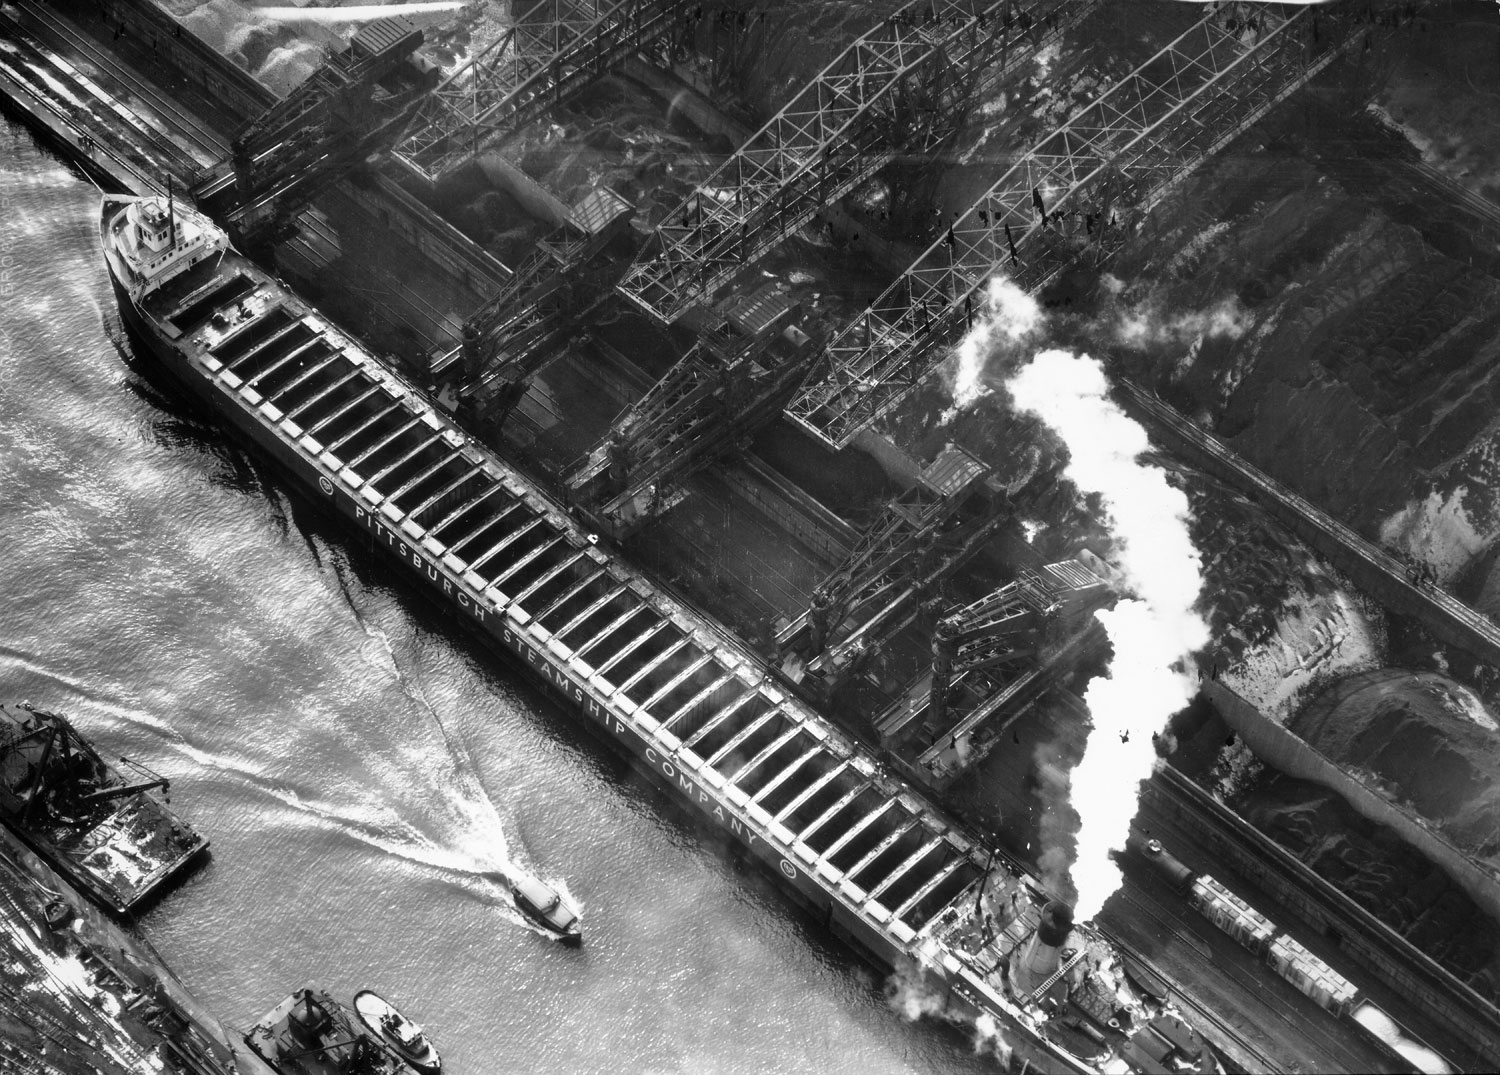 Pittsburgh Steamship Co. ship carrying ore to US Steel plant. Gary, Indiana, photographed from a helicopter, 1952.